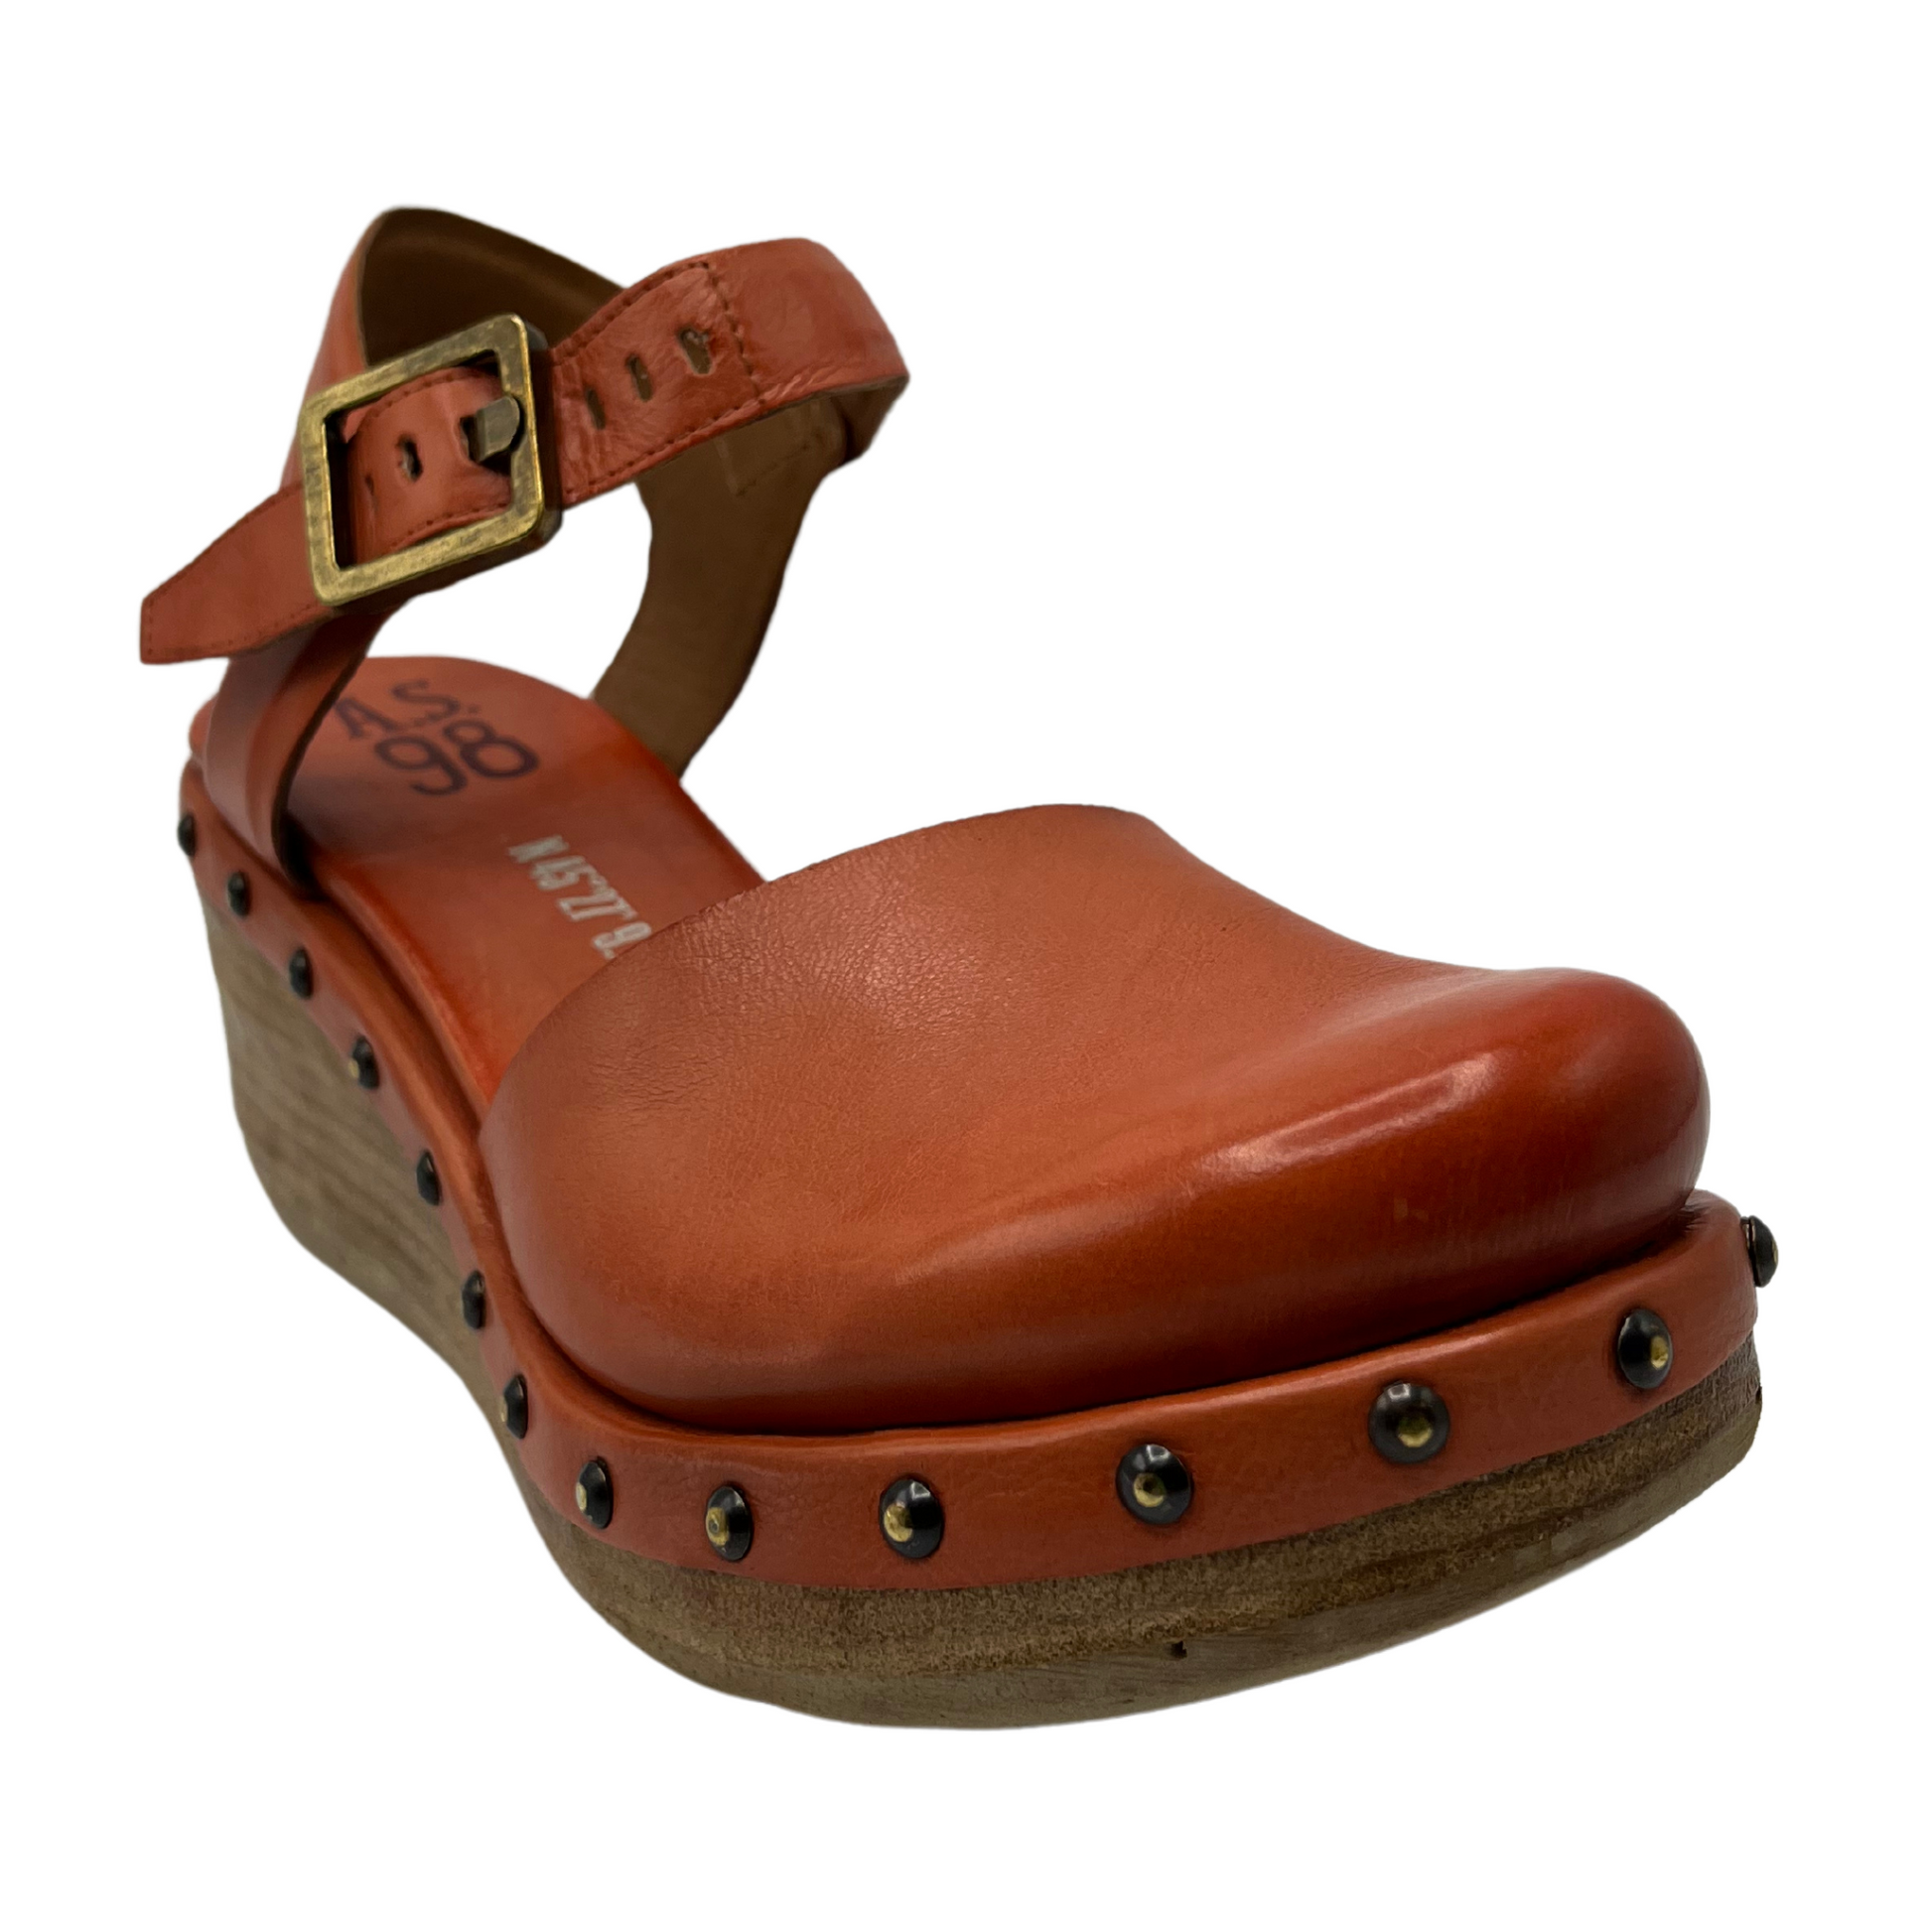 45 degree angled view of orange wedge shoe with rounded toe and studded details around 